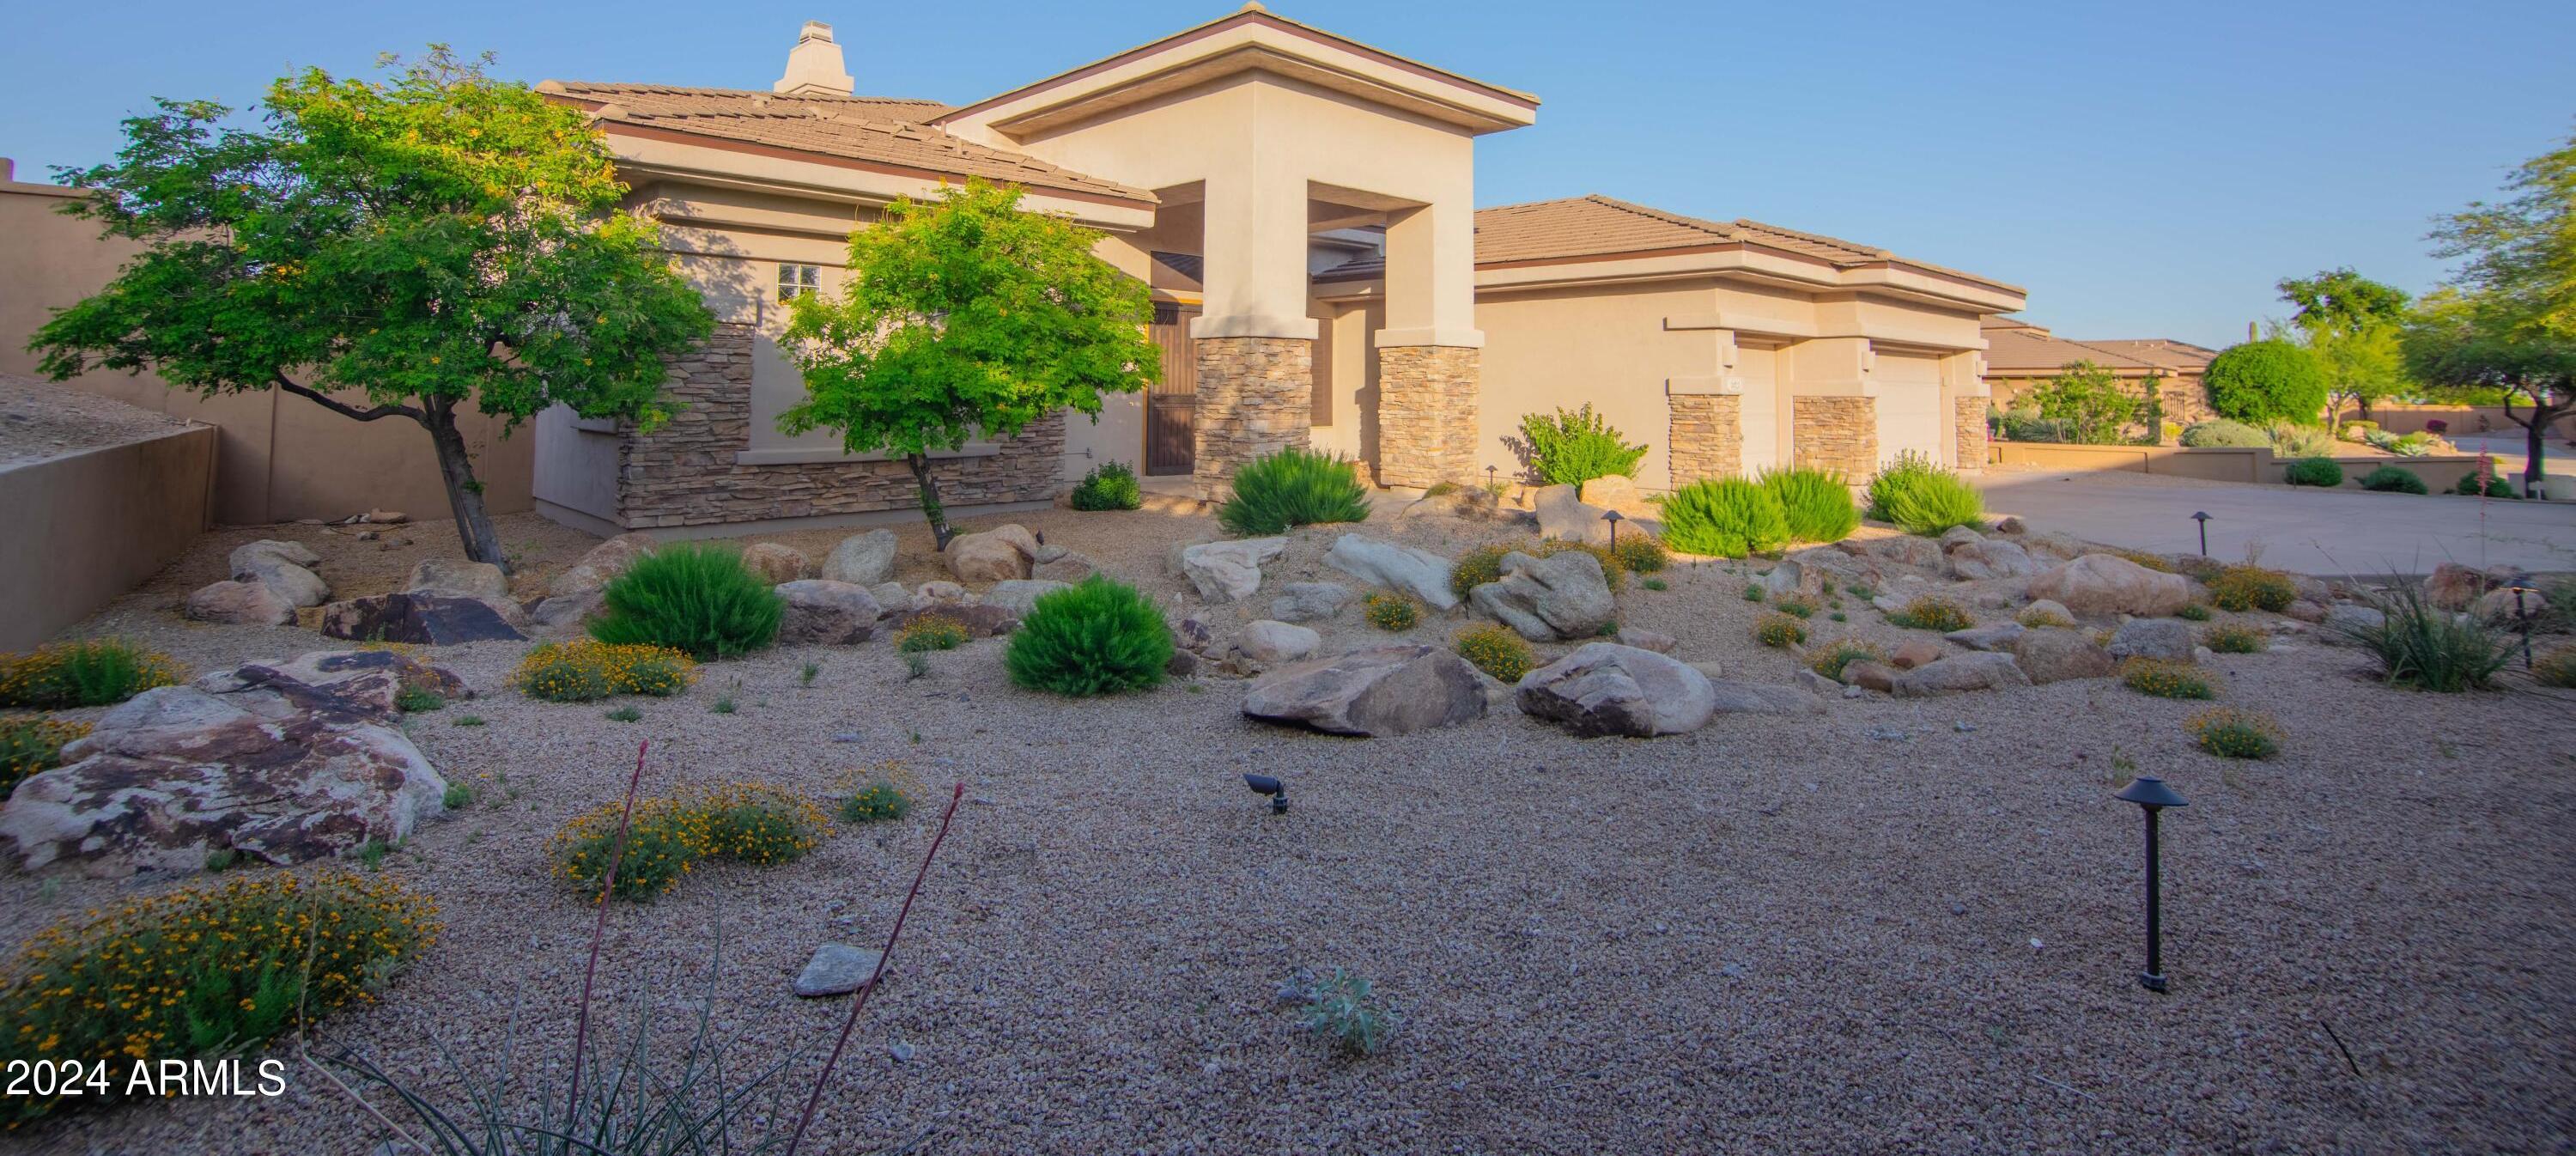 Photo one of 14724 E Canyoncrest Ct Fountain Hills AZ 85268 | MLS 6700843